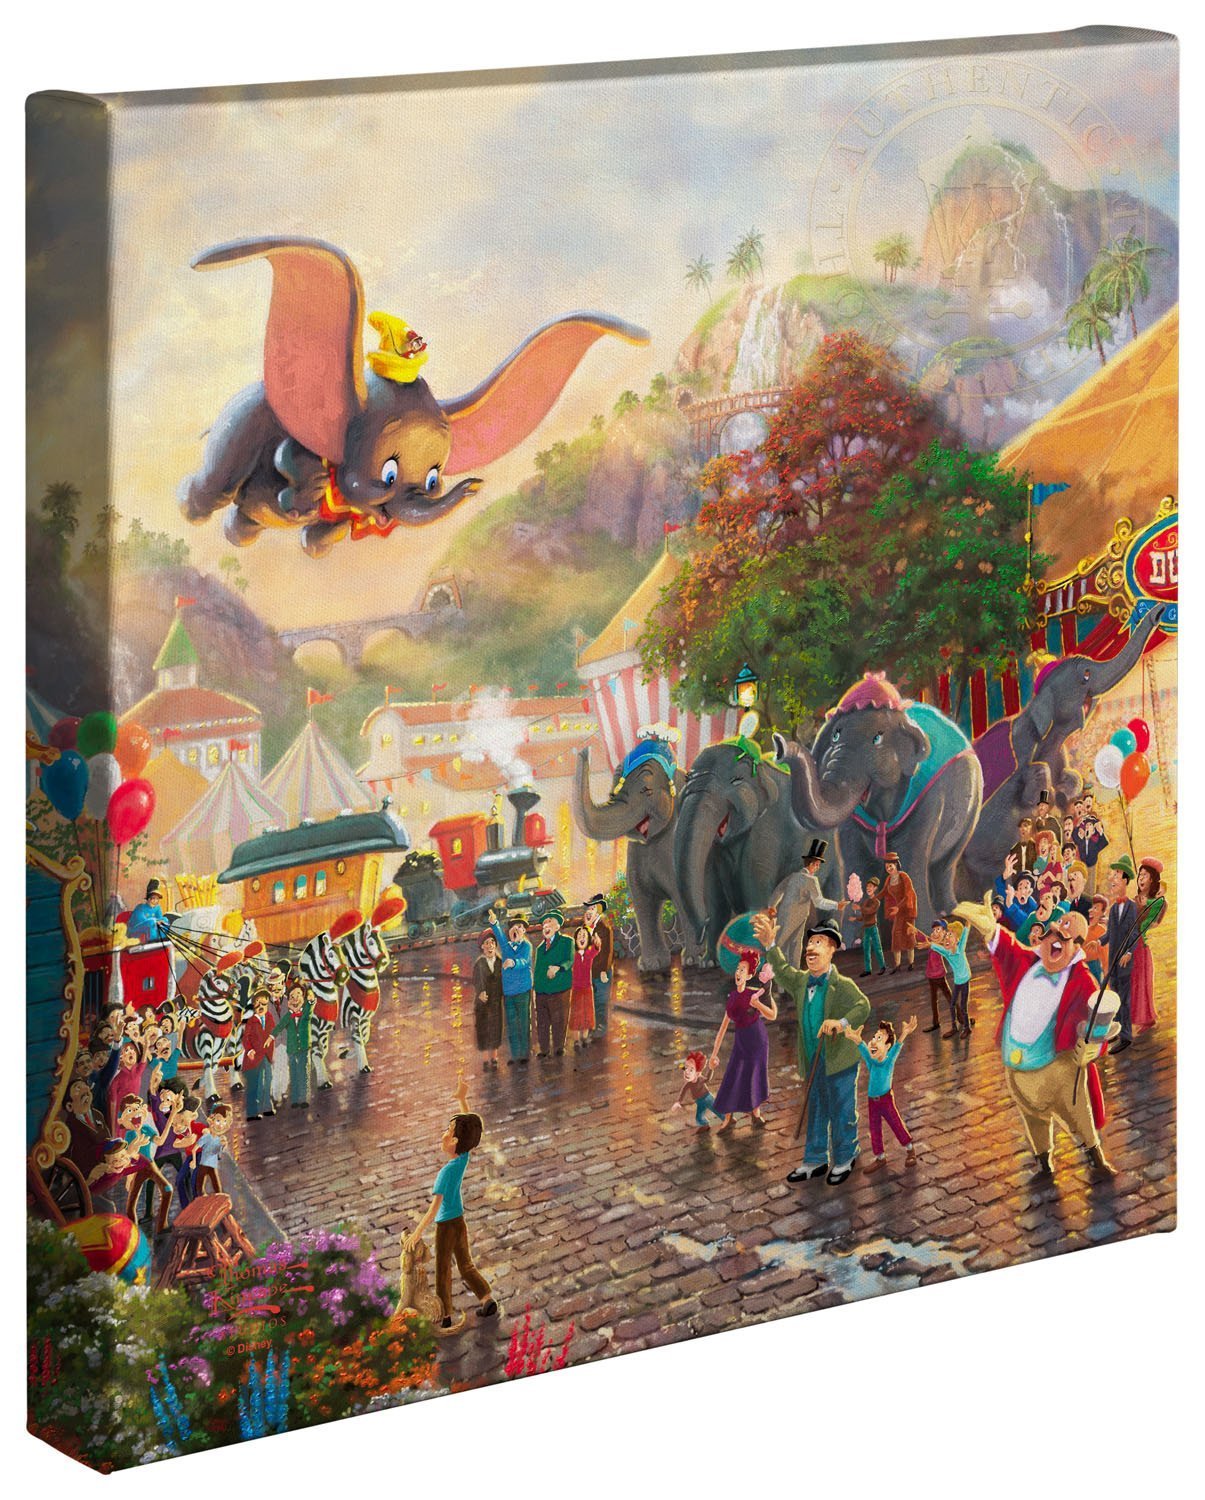 Dumbo by Thomas Kinkade  The happiness Dumbo soaring over the crowd. The onlookers’ faces beam with pride and joy in their friend’s accomplishments. 14 x14